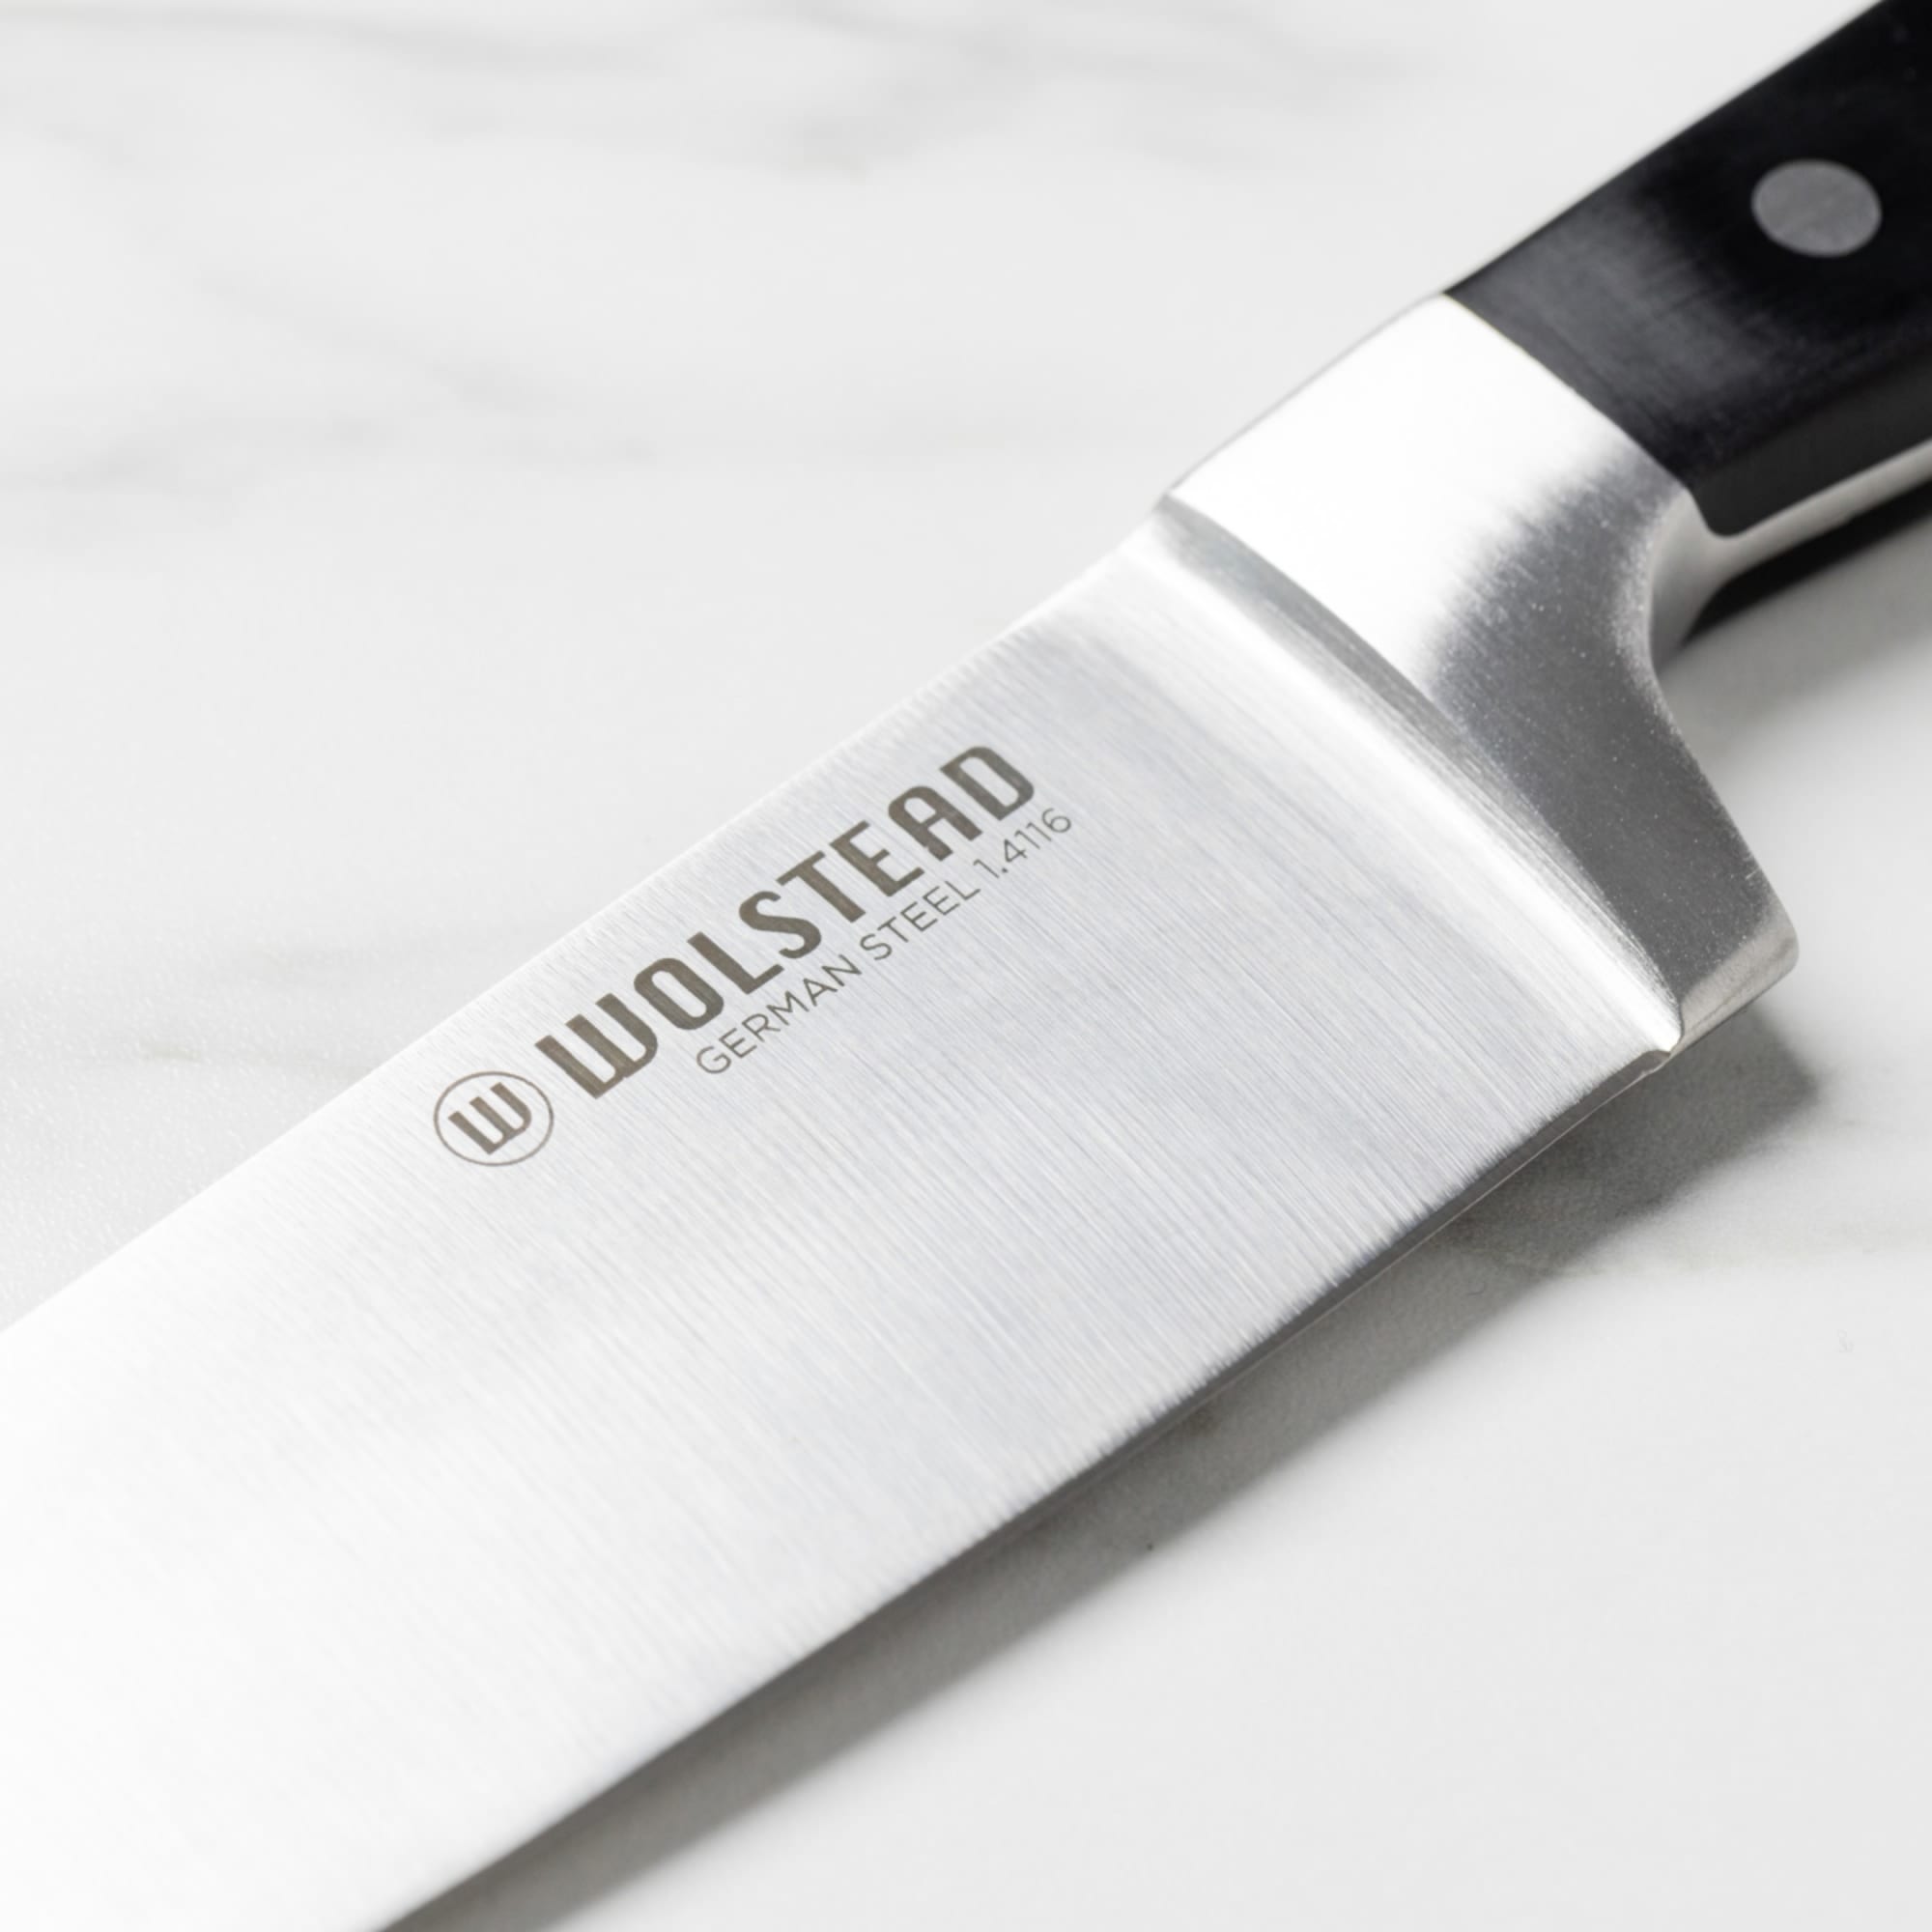 https://res.cloudinary.com/kitchenwarehouse/image/upload/c_fill,g_face,w_1250/f_auto/t_PDP_2000x2000/Kitchen%20Warehouse%20Images%20/Wolstead-Calibre-Chef-Knife-20cm-HDP_1.jpg